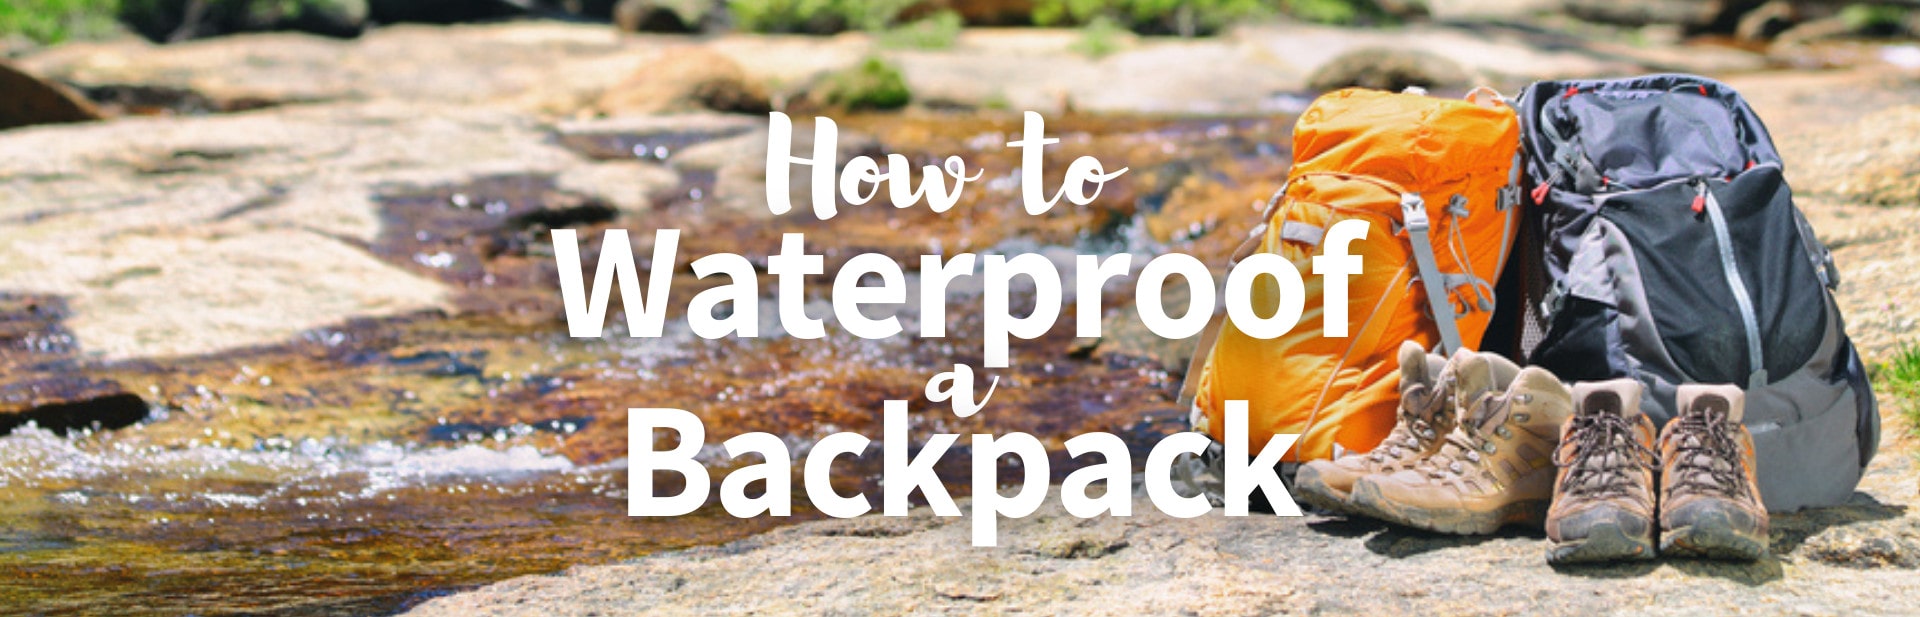 How To Waterproof A Backpack: 4 Ways and Tips for Keeping Hiking Gear Dry and Clean